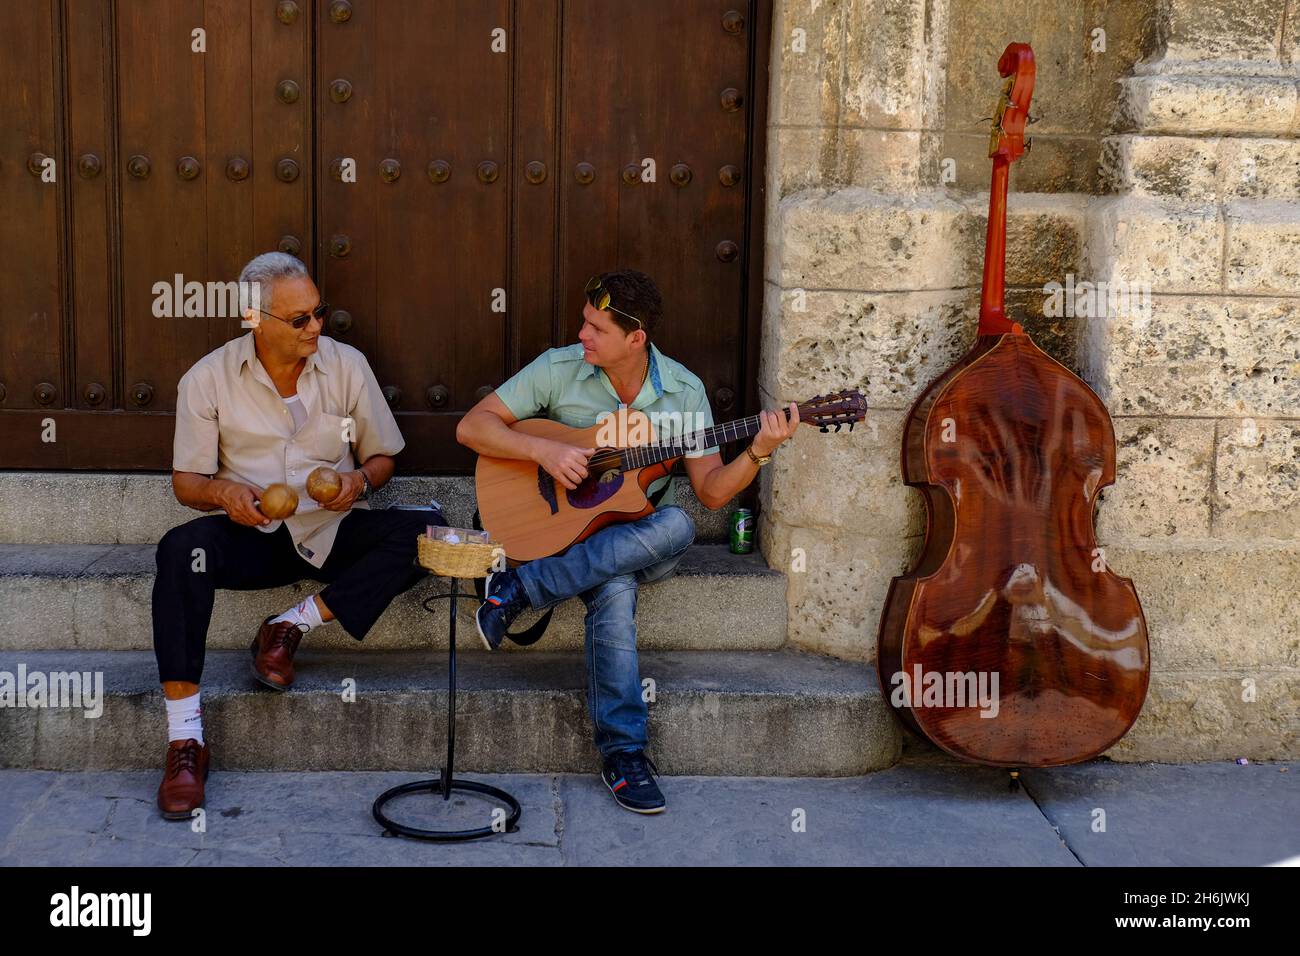 Street performers entertain the passers by, Havana, Cuba, West Indies, Central America Stock Photo